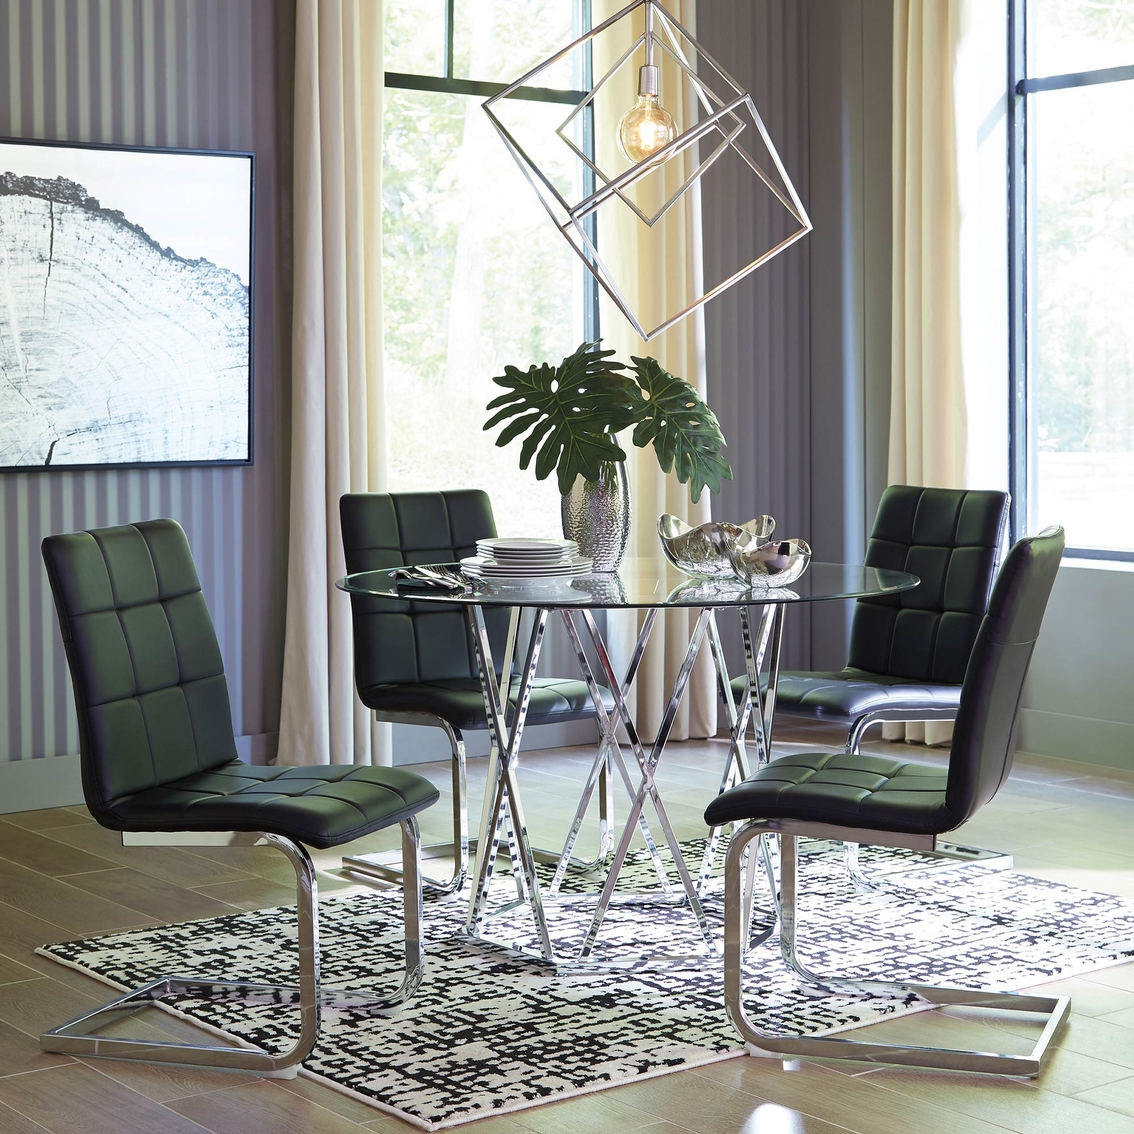 Signature Design by Ashley Madanere Table and Chairs 5 pc. Set - Image 3 of 4